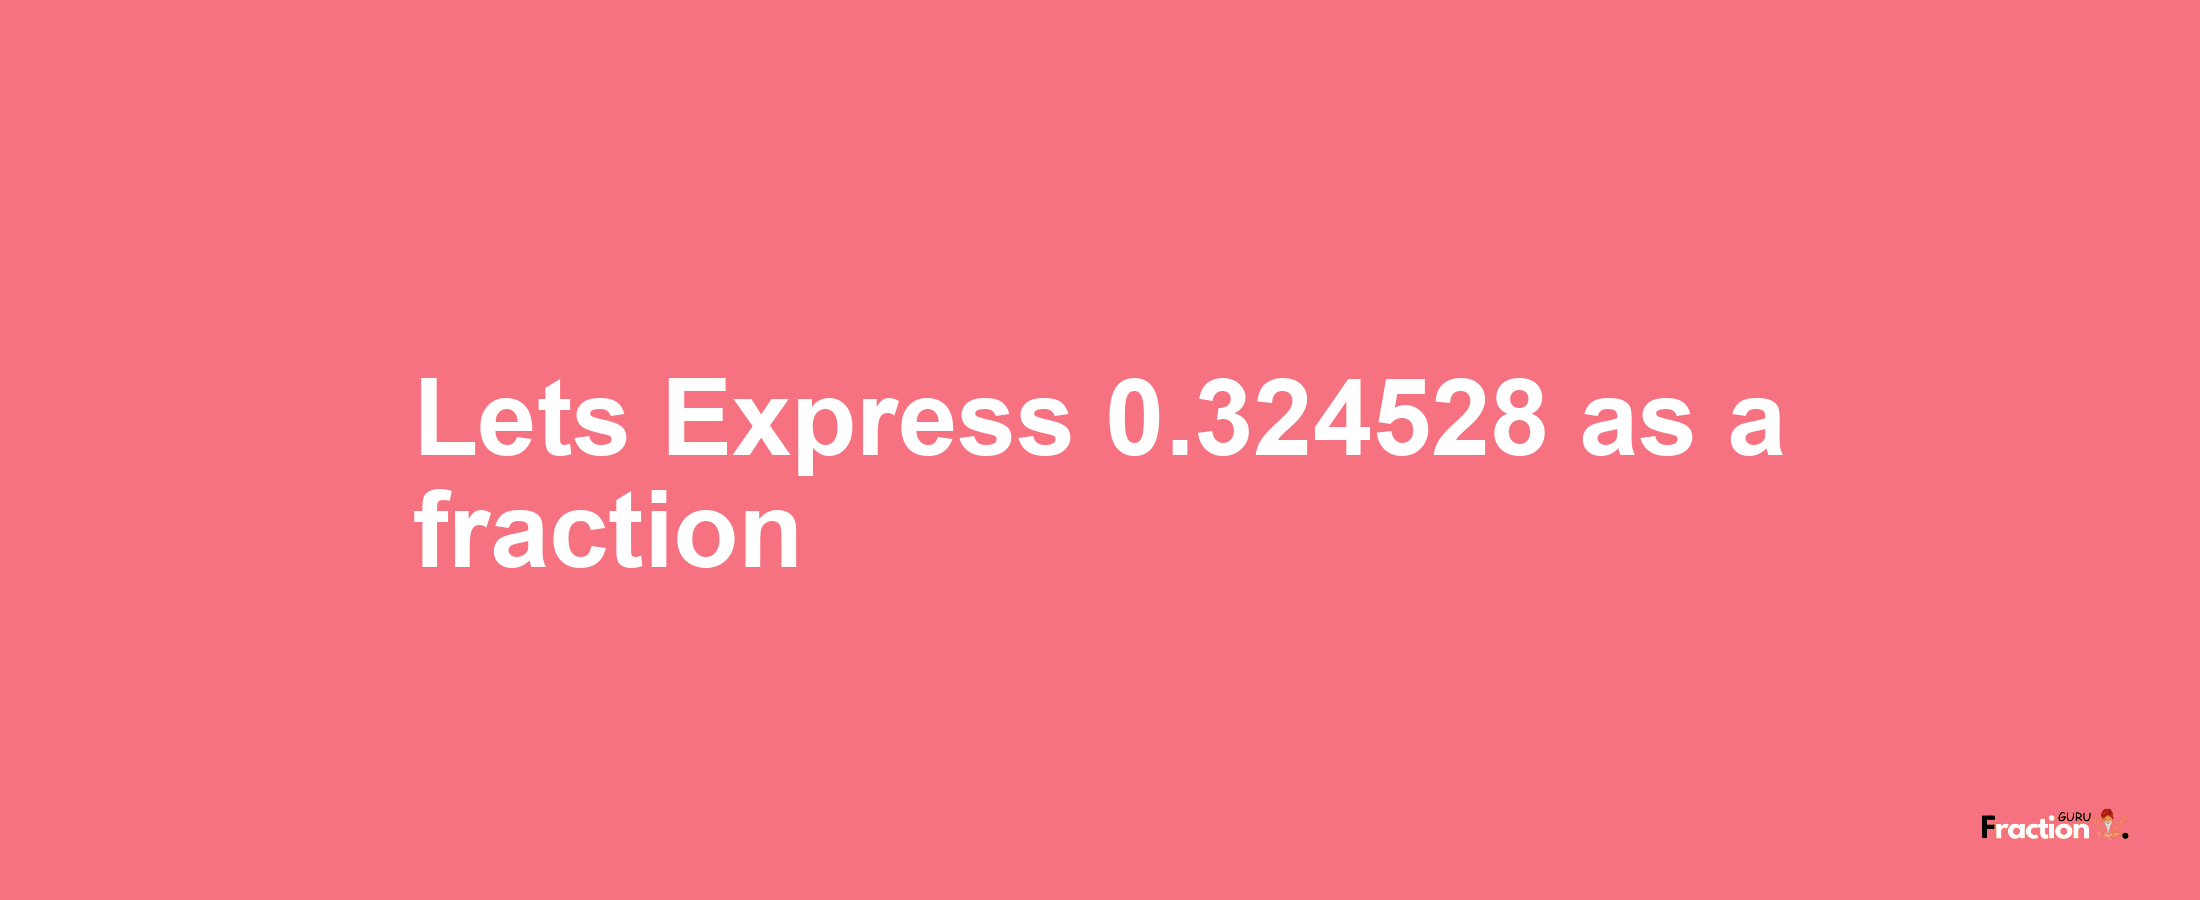 Lets Express 0.324528 as afraction